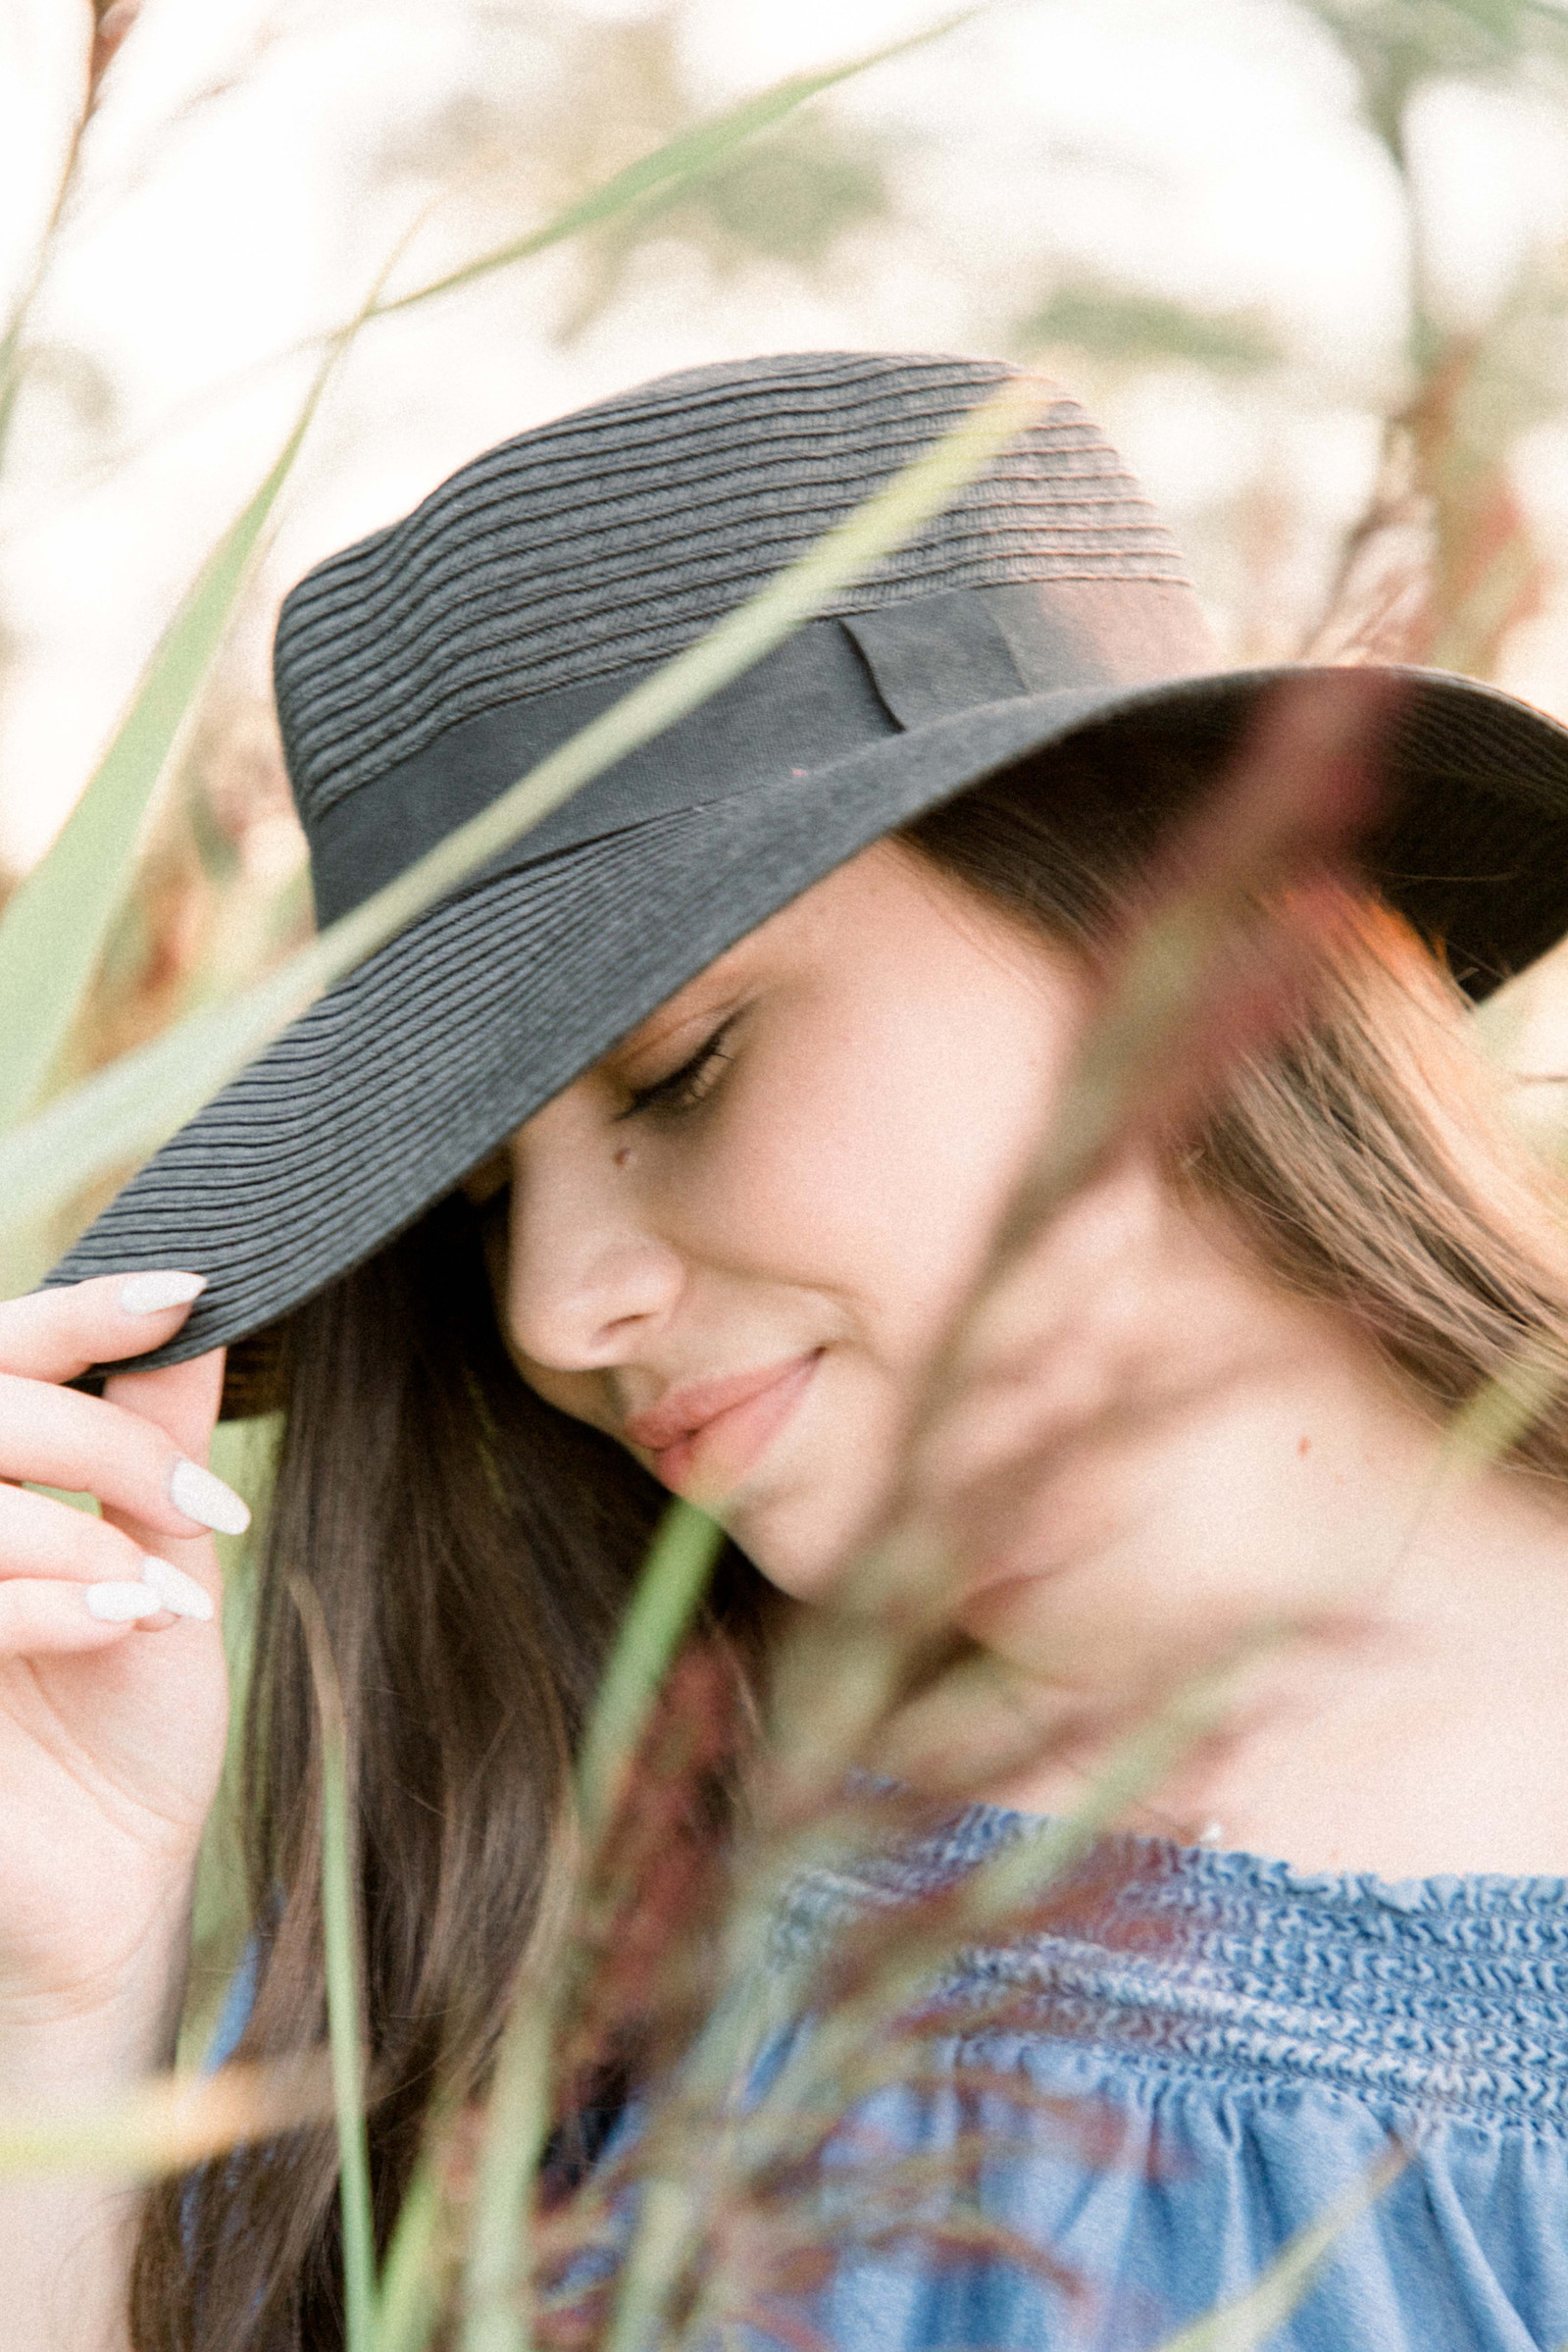 Portrait of woman with hat standing in tall grass, Emily VanderBeek Photography, Portrait and Family Photography, Niagara Photographer, Champlain Photographer, Vaudreuil-Soulanges Photographer, candid photography, authentic photography.